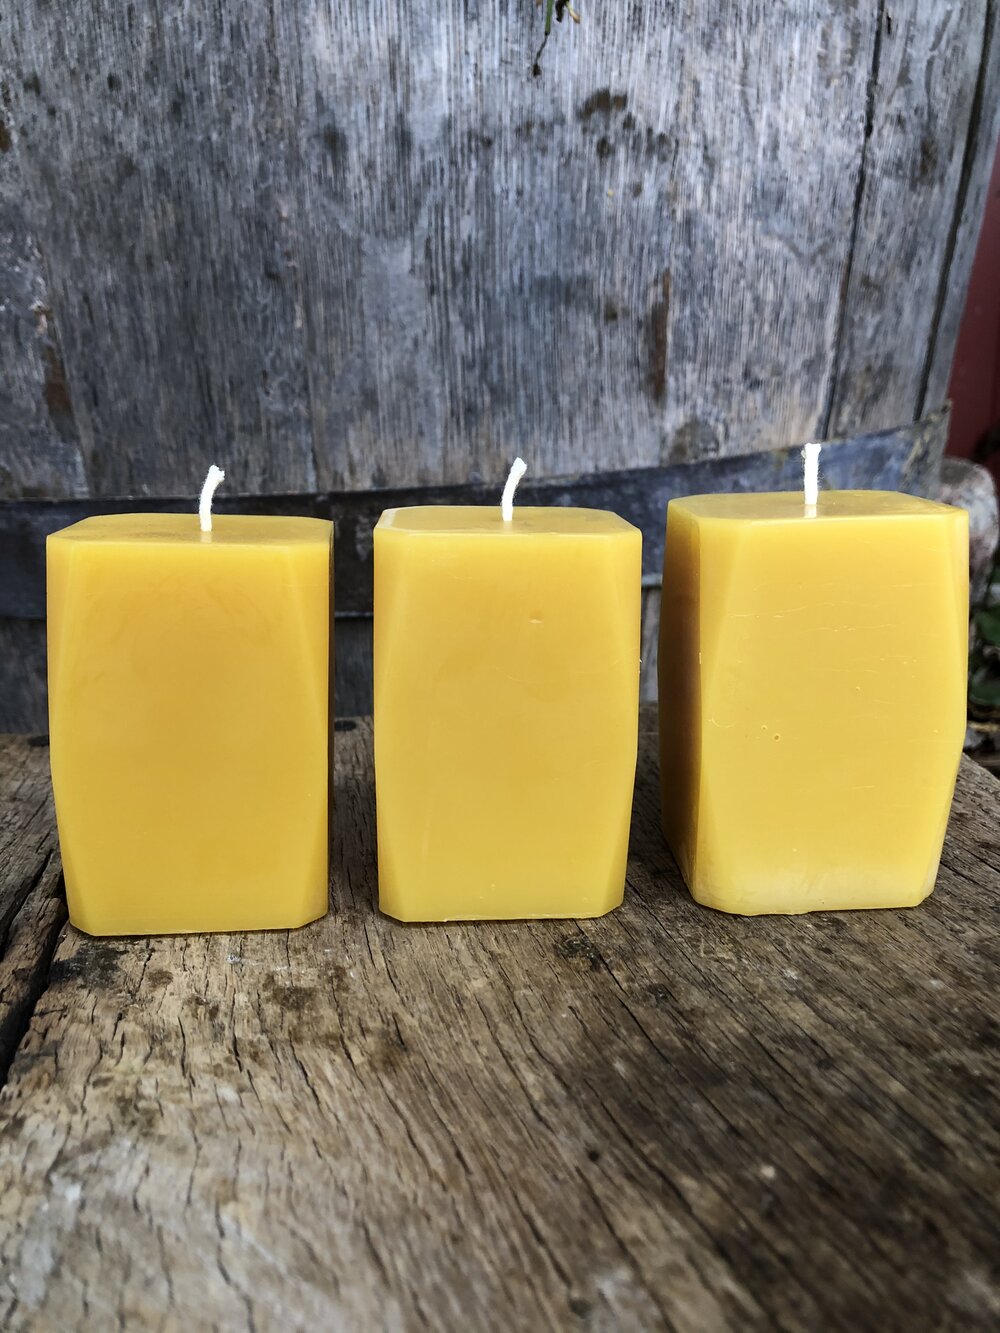 Candle Wicks for Long-Lasting Candles